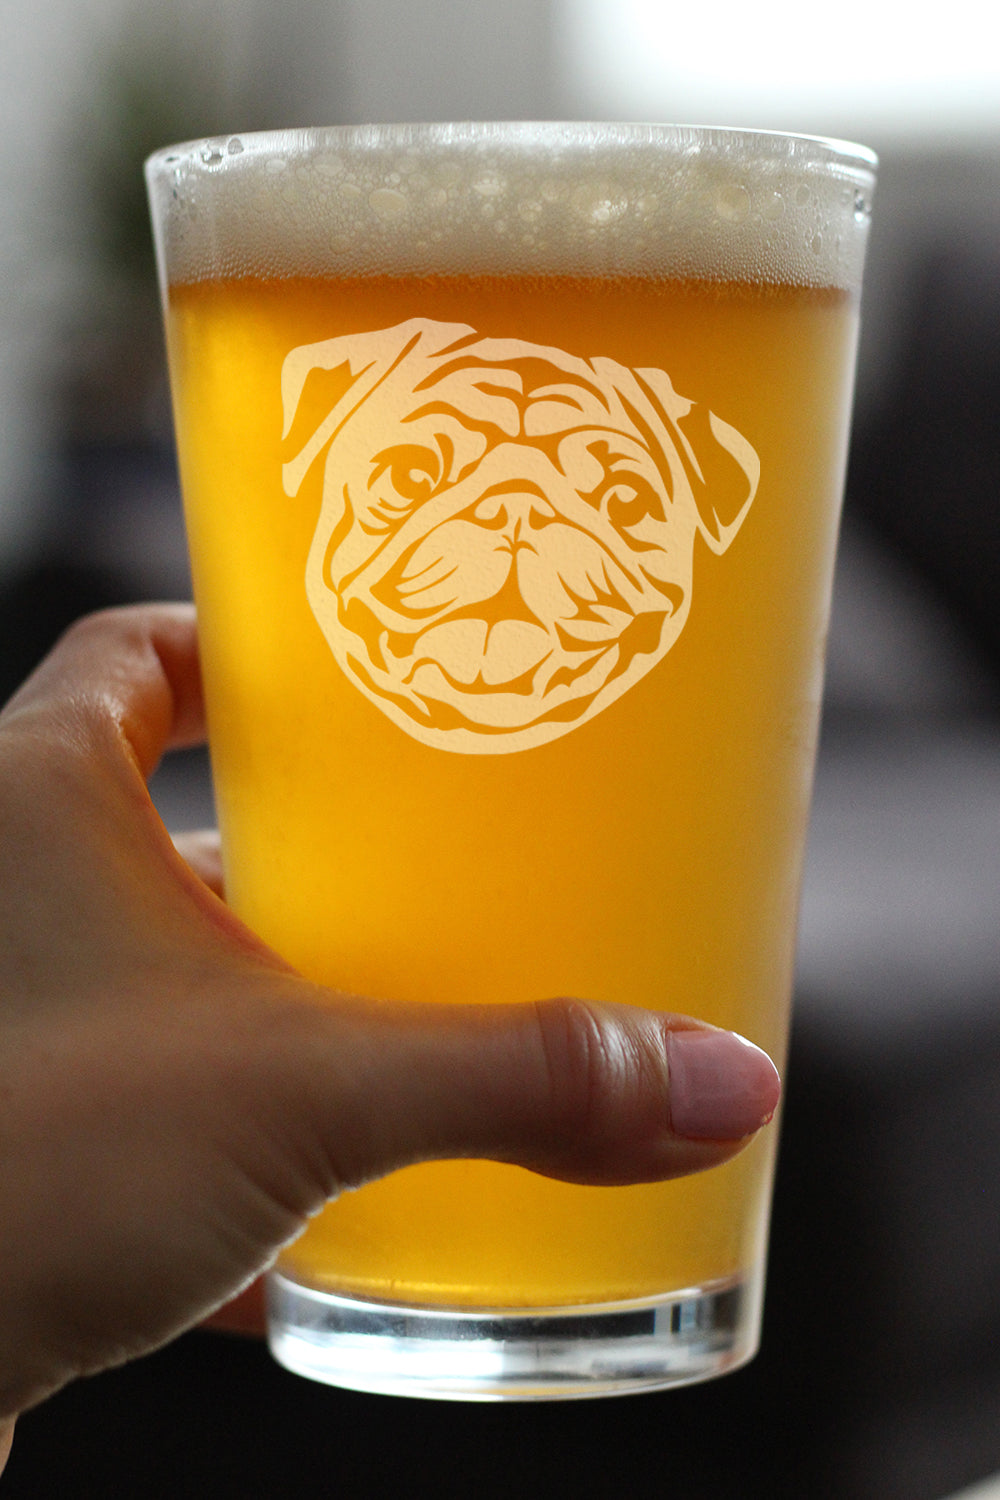 Happy Pug Pint Glass for Beer - Fun Dog Themed Decor and Gifts for Moms &amp; Dads of Pugs - 16 oz Glasses